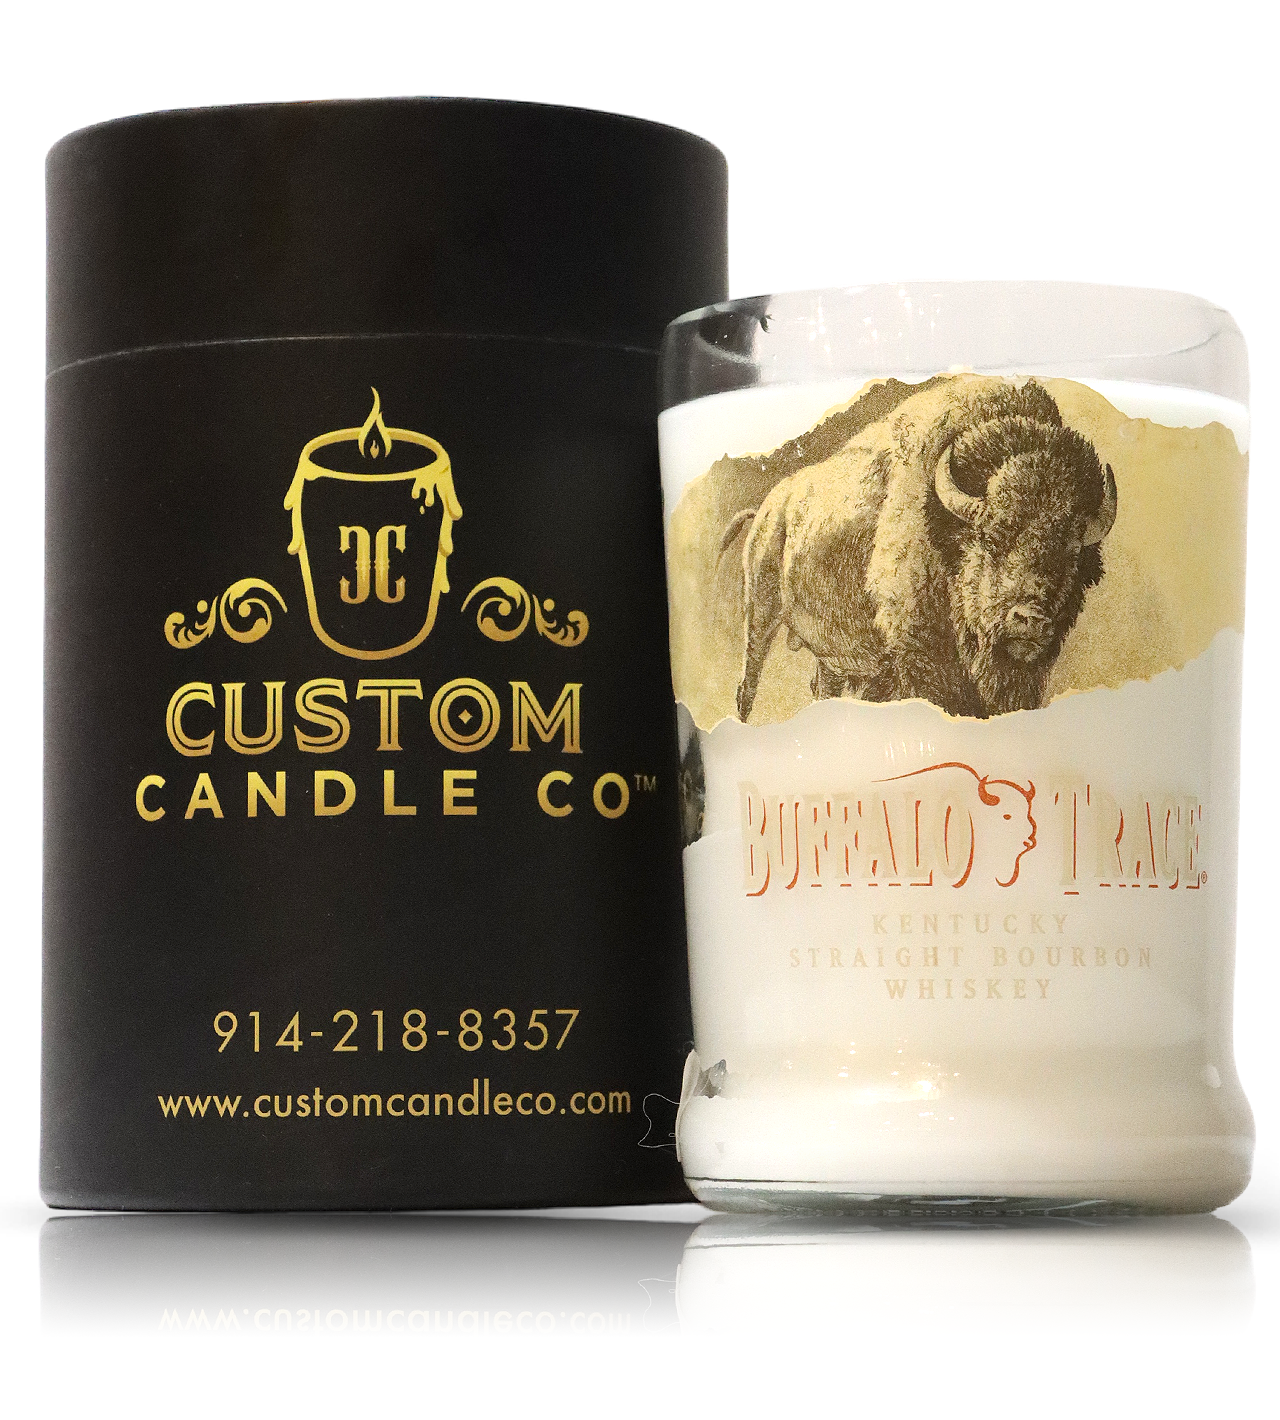 A Recycled Buffalo Trace Whiskey Candle with an image of a bison next to it.